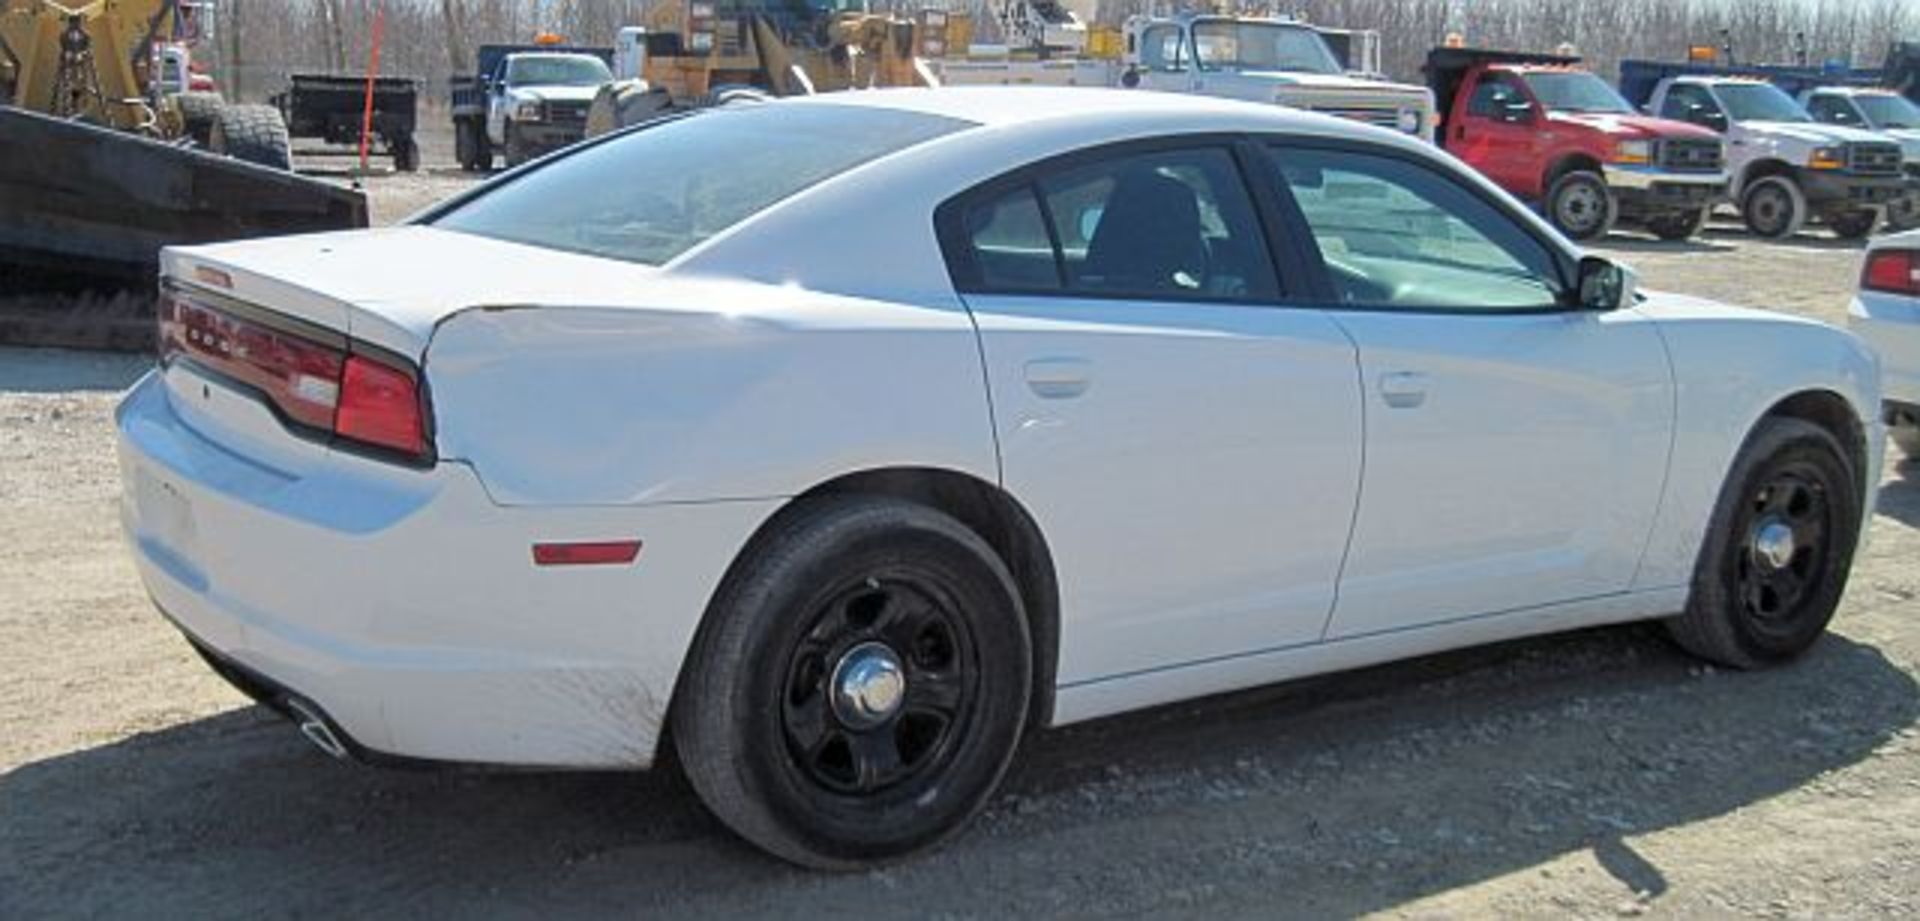 Lot 38 -  Lot# 38 2011 Dodge Charger 2011 Dodge Charger; 5.7L V8; tires fair, no dings or scratches; - Image 4 of 5